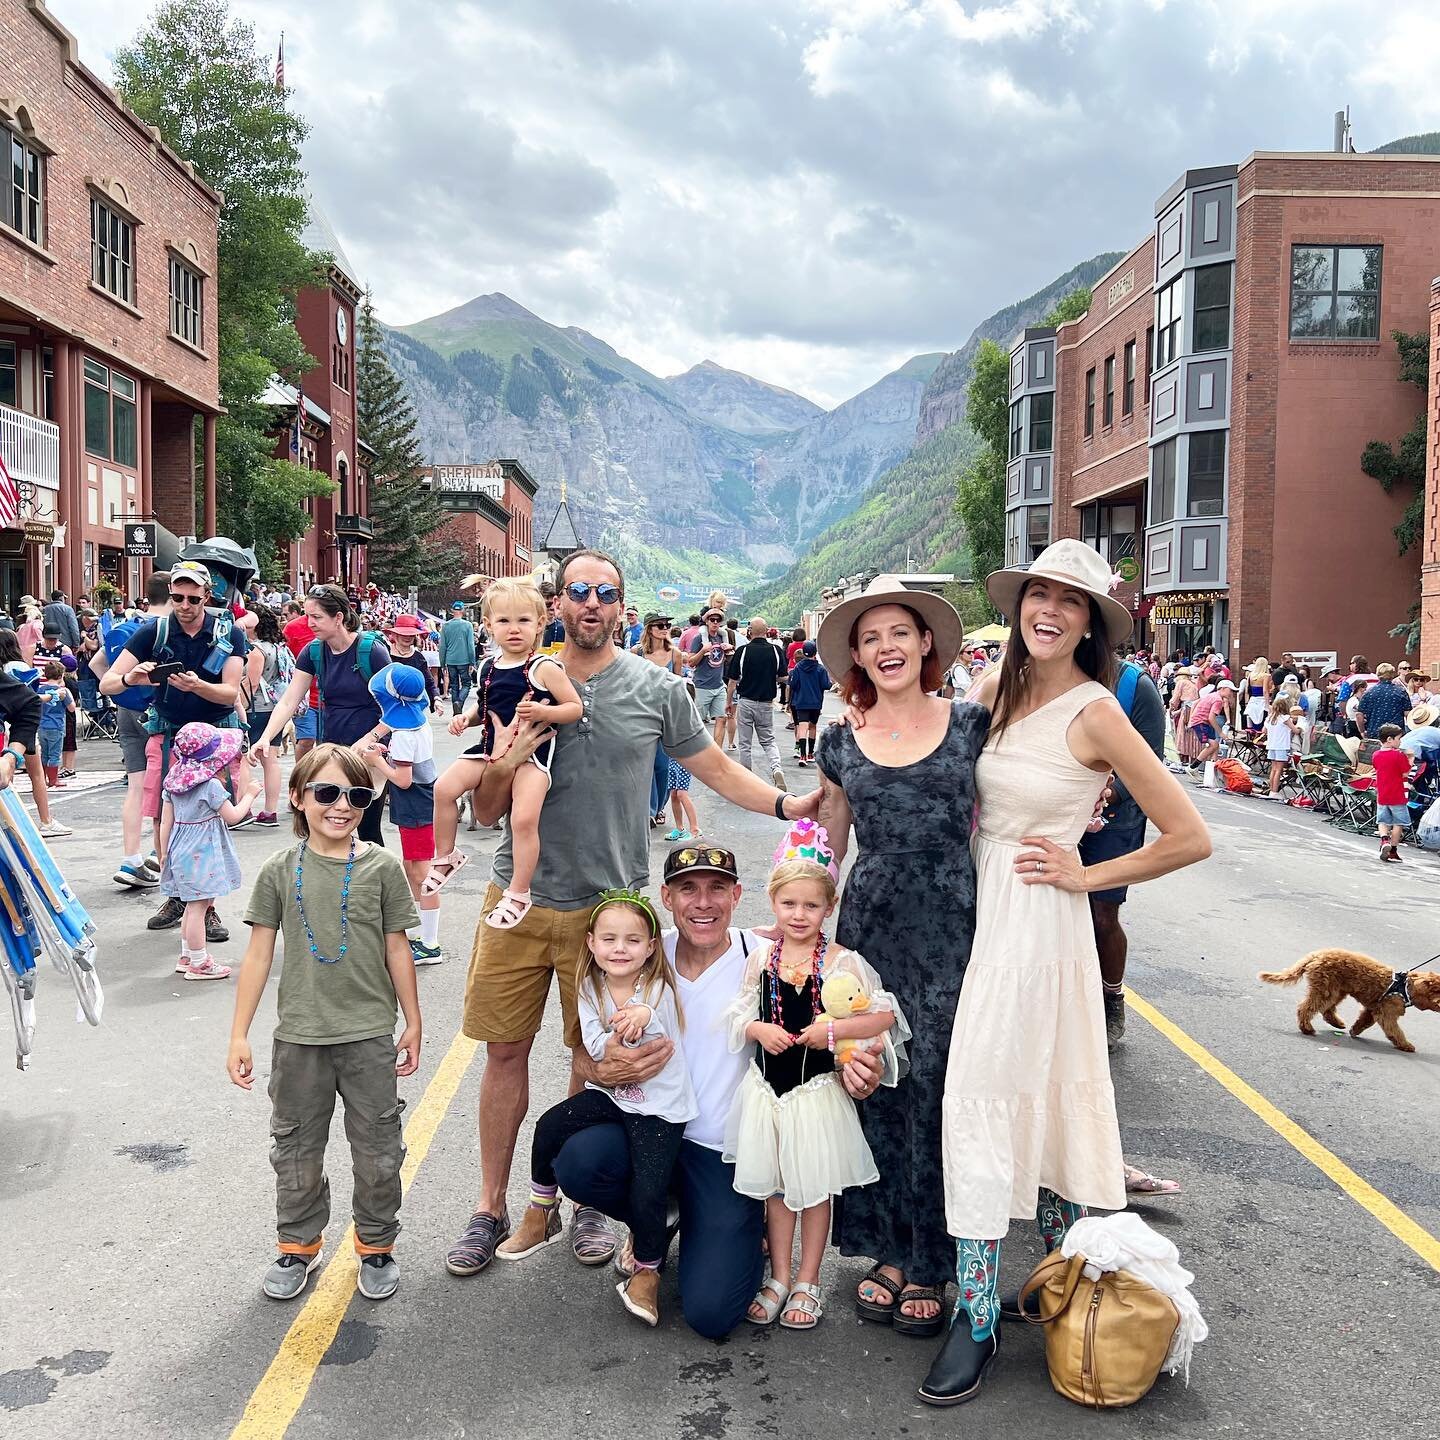 2 weeks in Telluride and more fun times then I can possibly put in words. Lovely to disconnect in the mountains with some of our favorite people @celestiafrench (and co.) @drtdanny and the jenkins family.